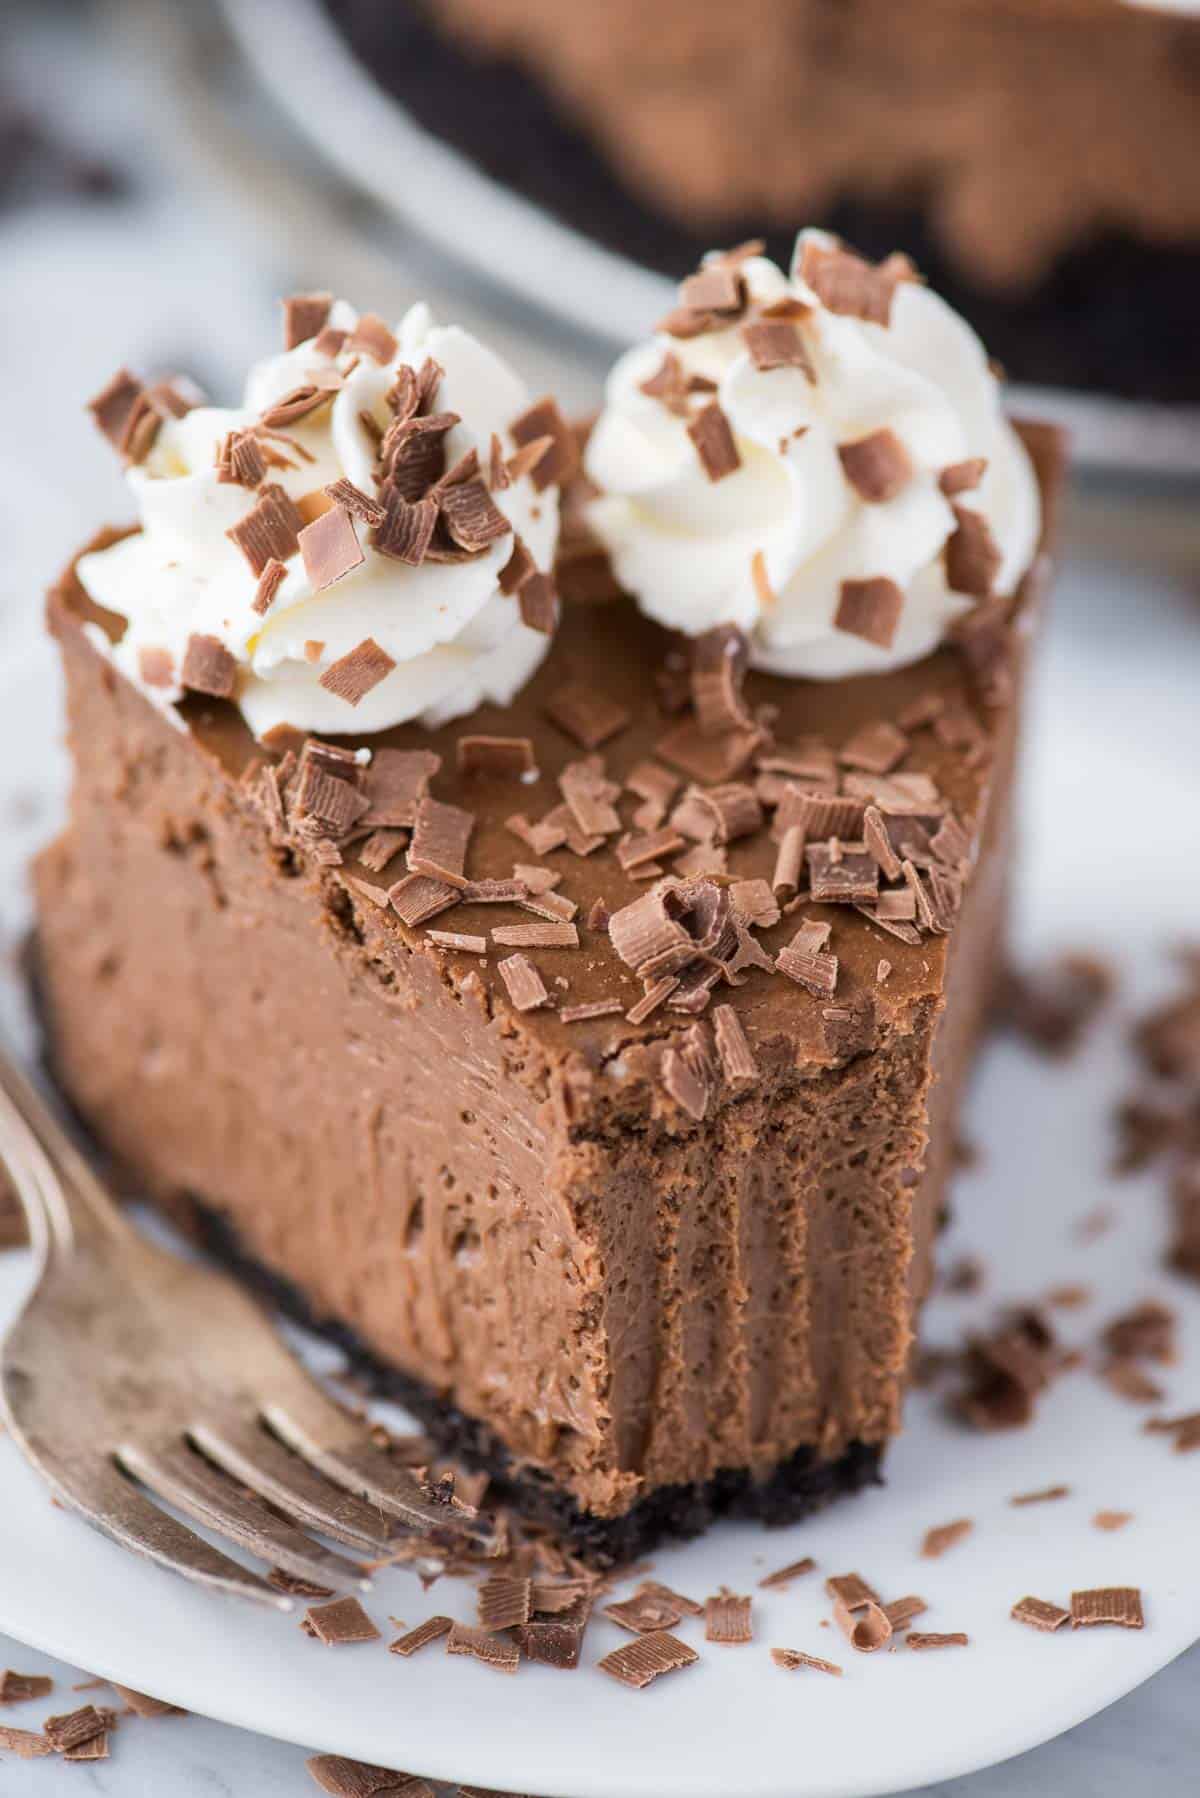 slice of chocolate cheesecake with chocolate shavings on white plate